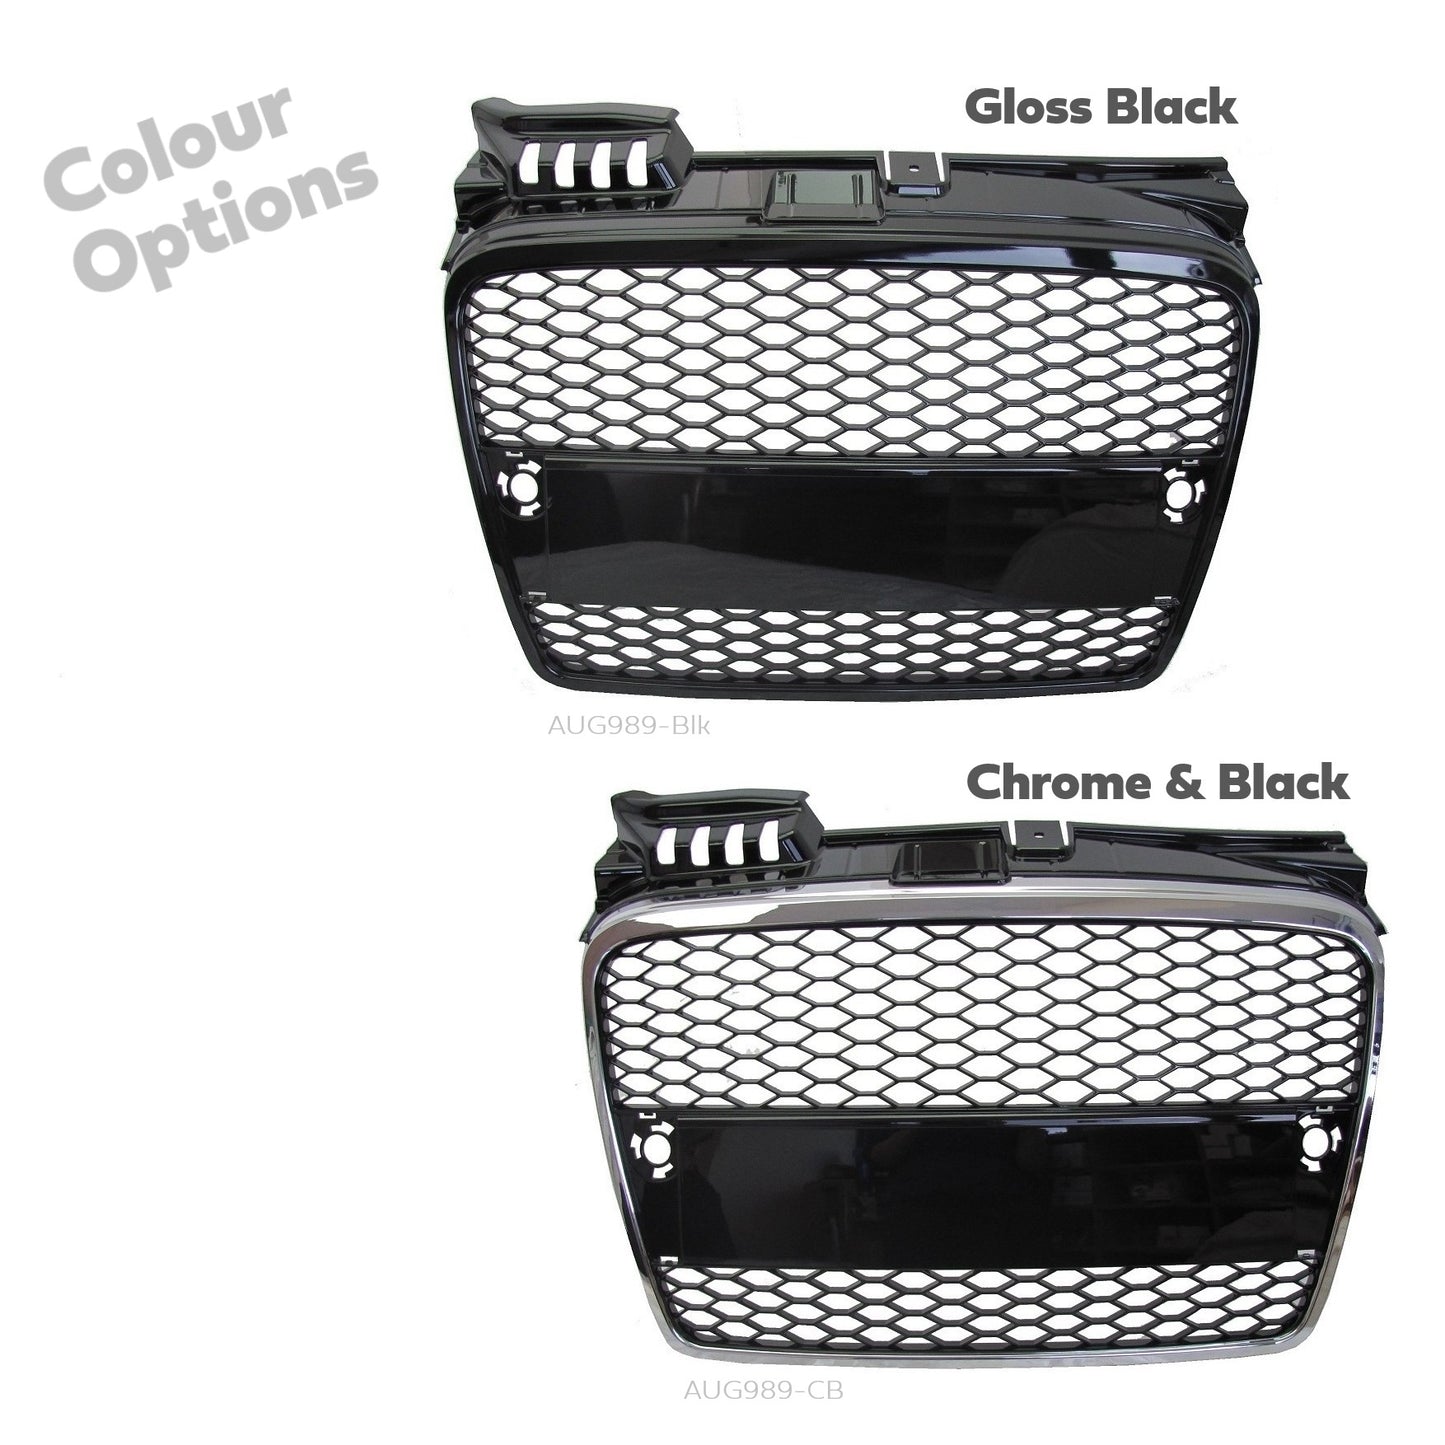 RS4 style front grille - Gloss Black for Audi A4